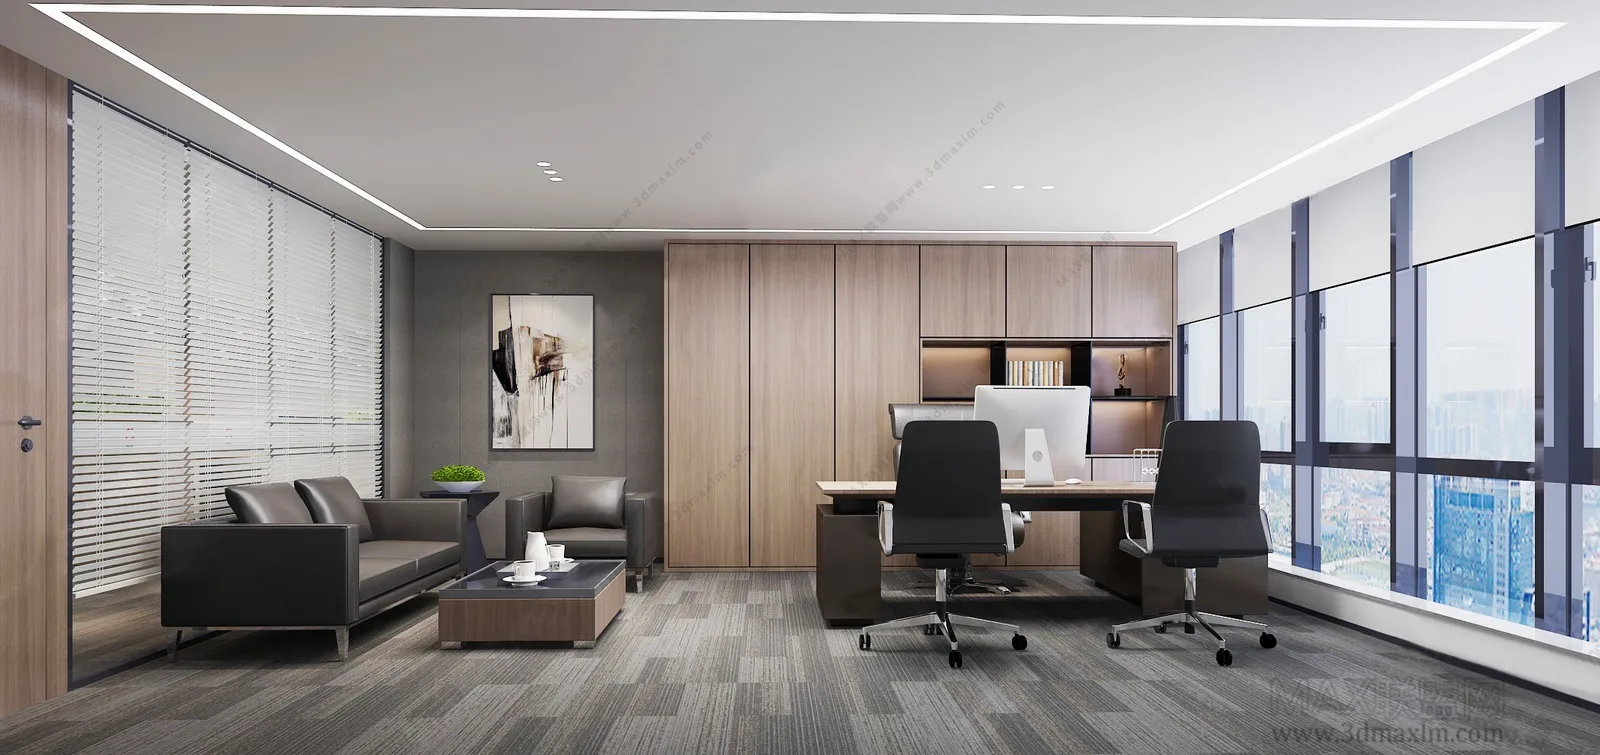 3D OFFICE INTERIOR (VRAY) – MANAGER ROOM 3D SCENES – 009